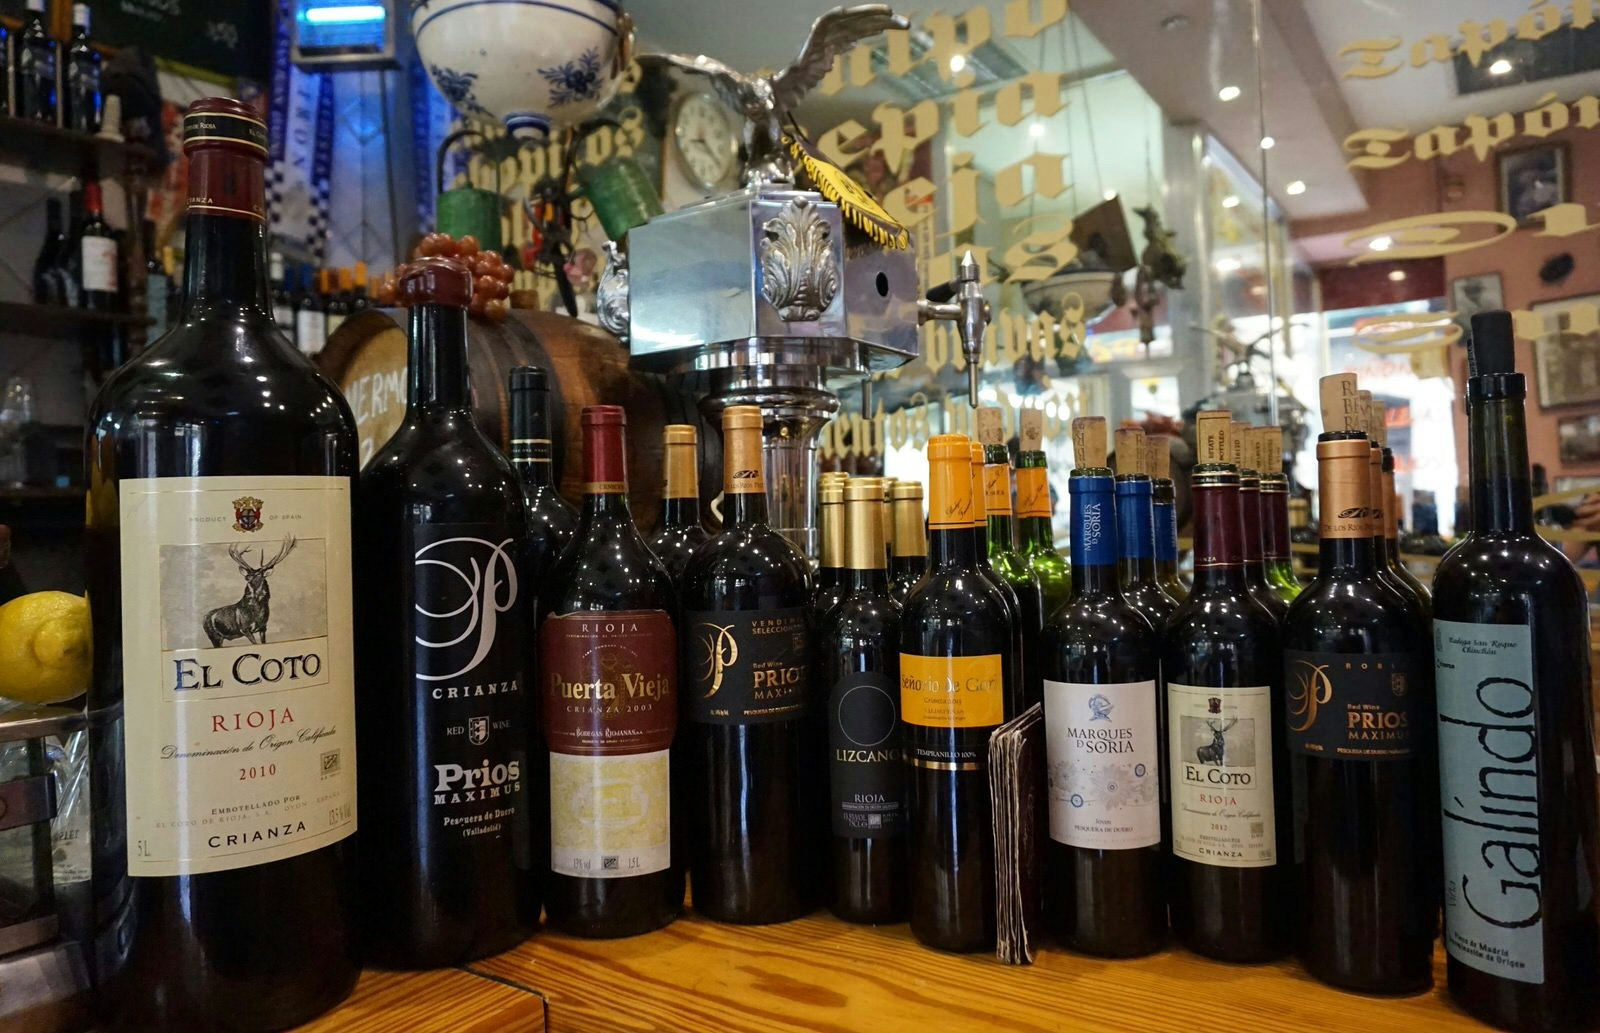 Selection of wines at Casa Toni © Daniel Welsch / Lonely Planet